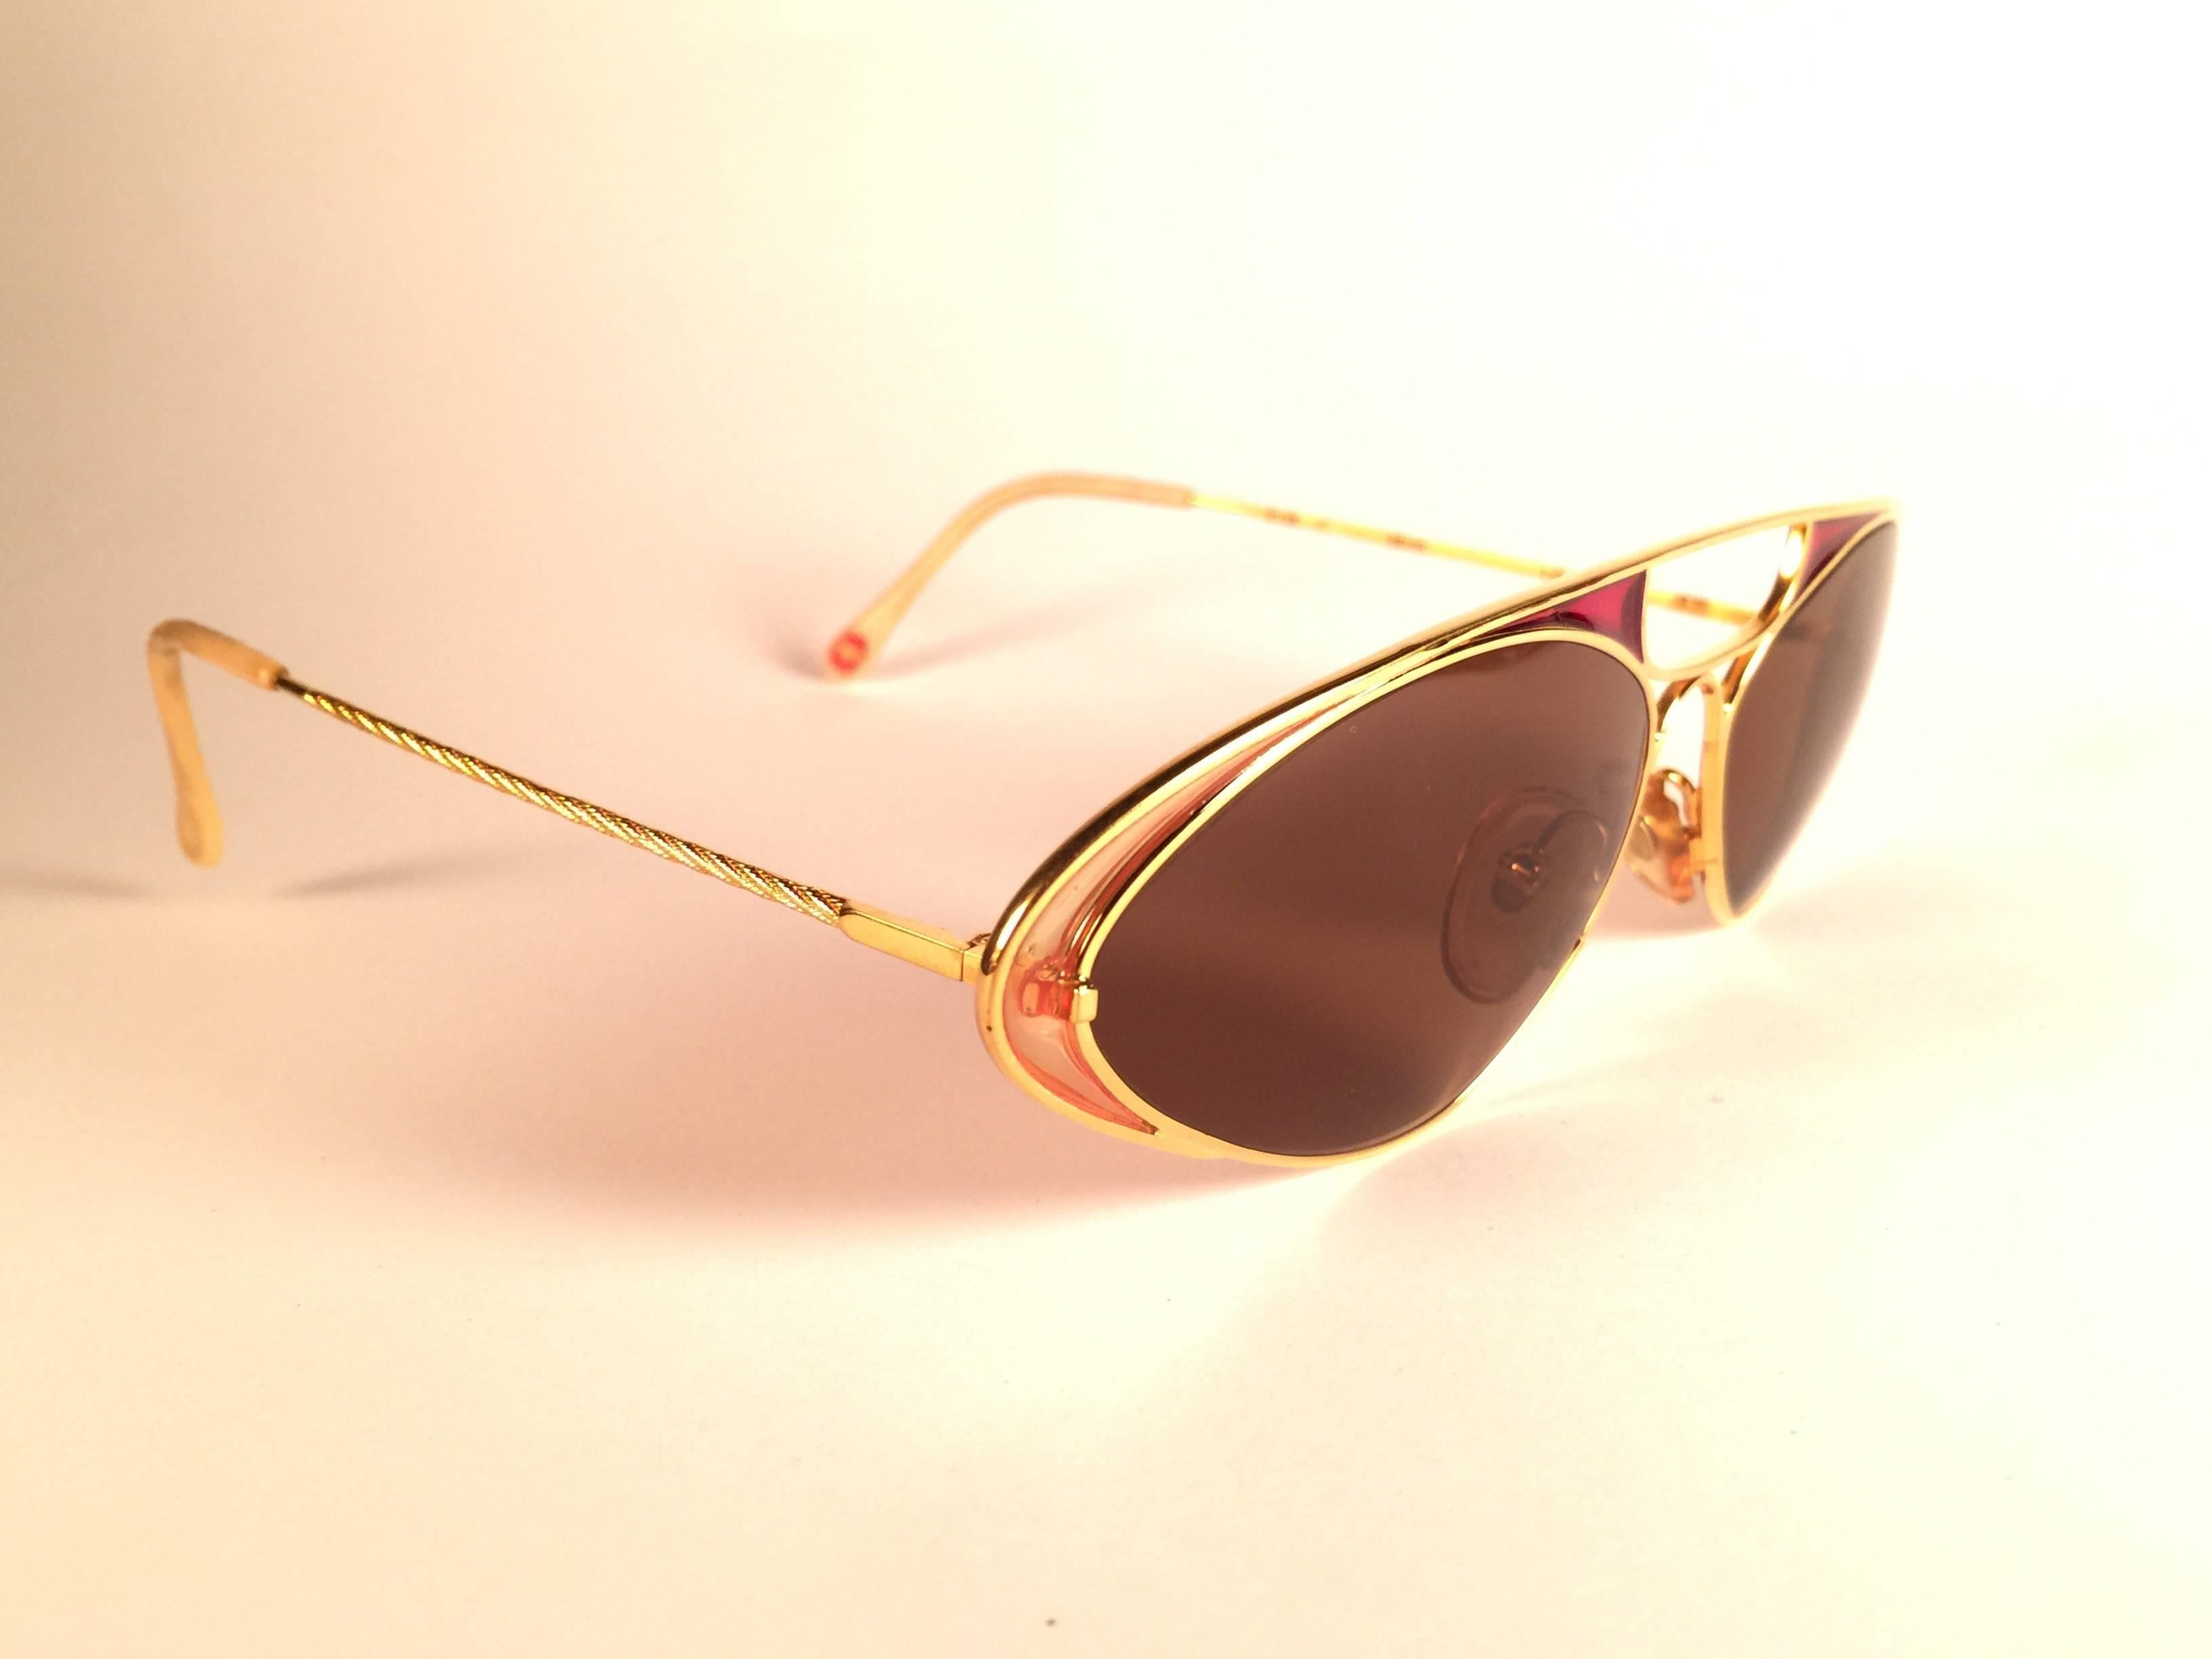 New Vintage Casanova Gold with enamel details frame holding a pair of solid brown lenses.

New, never worn or displayed. This pair may show minor sign of wear due to storage.

Made in Italy.